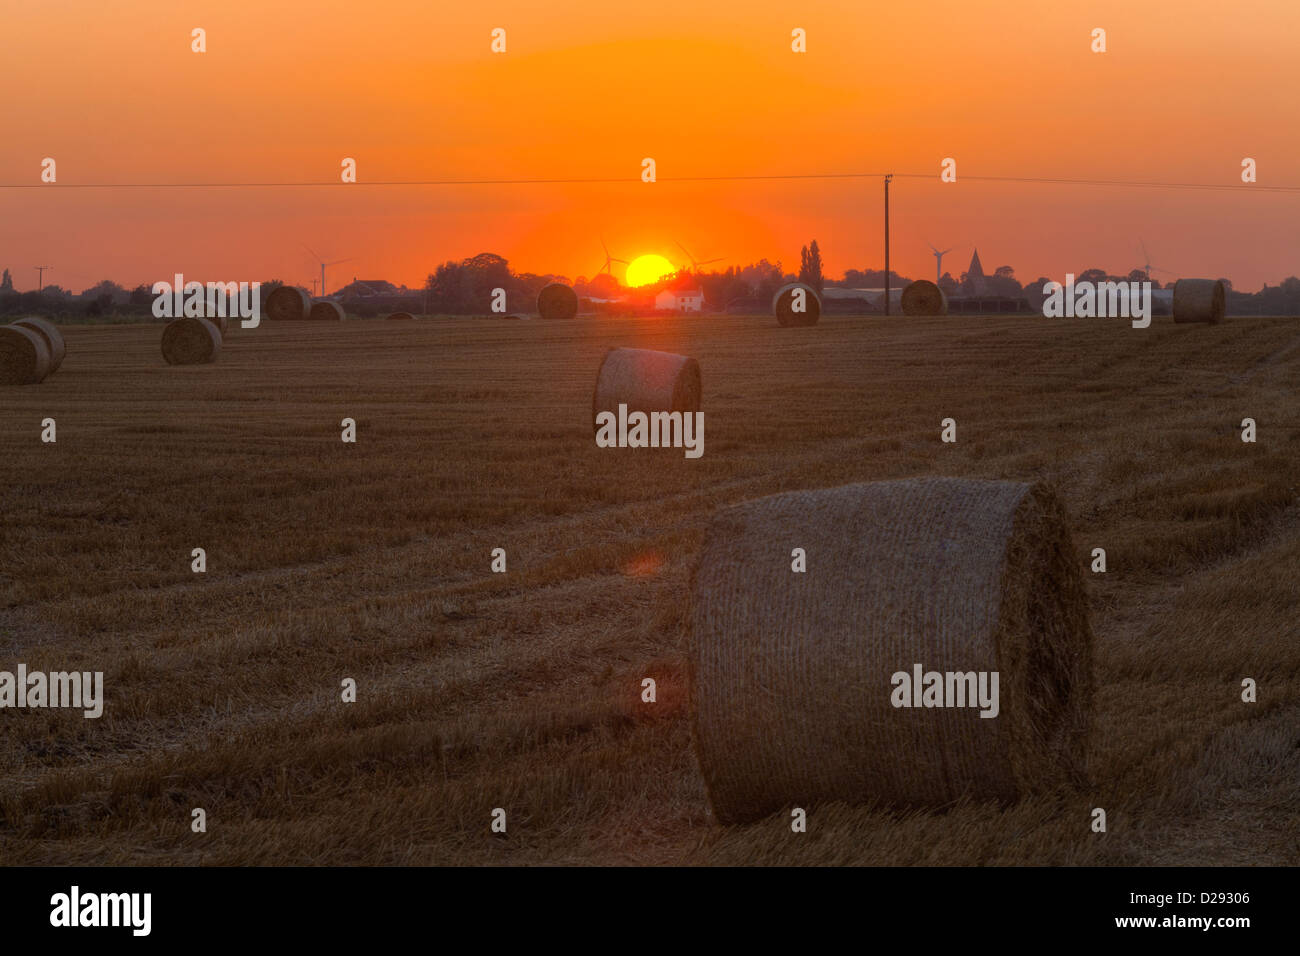 Fenland landscape at sunset. Large round straw bales in a recently harvested wheat field, Cambridgeshire, England. Stock Photo